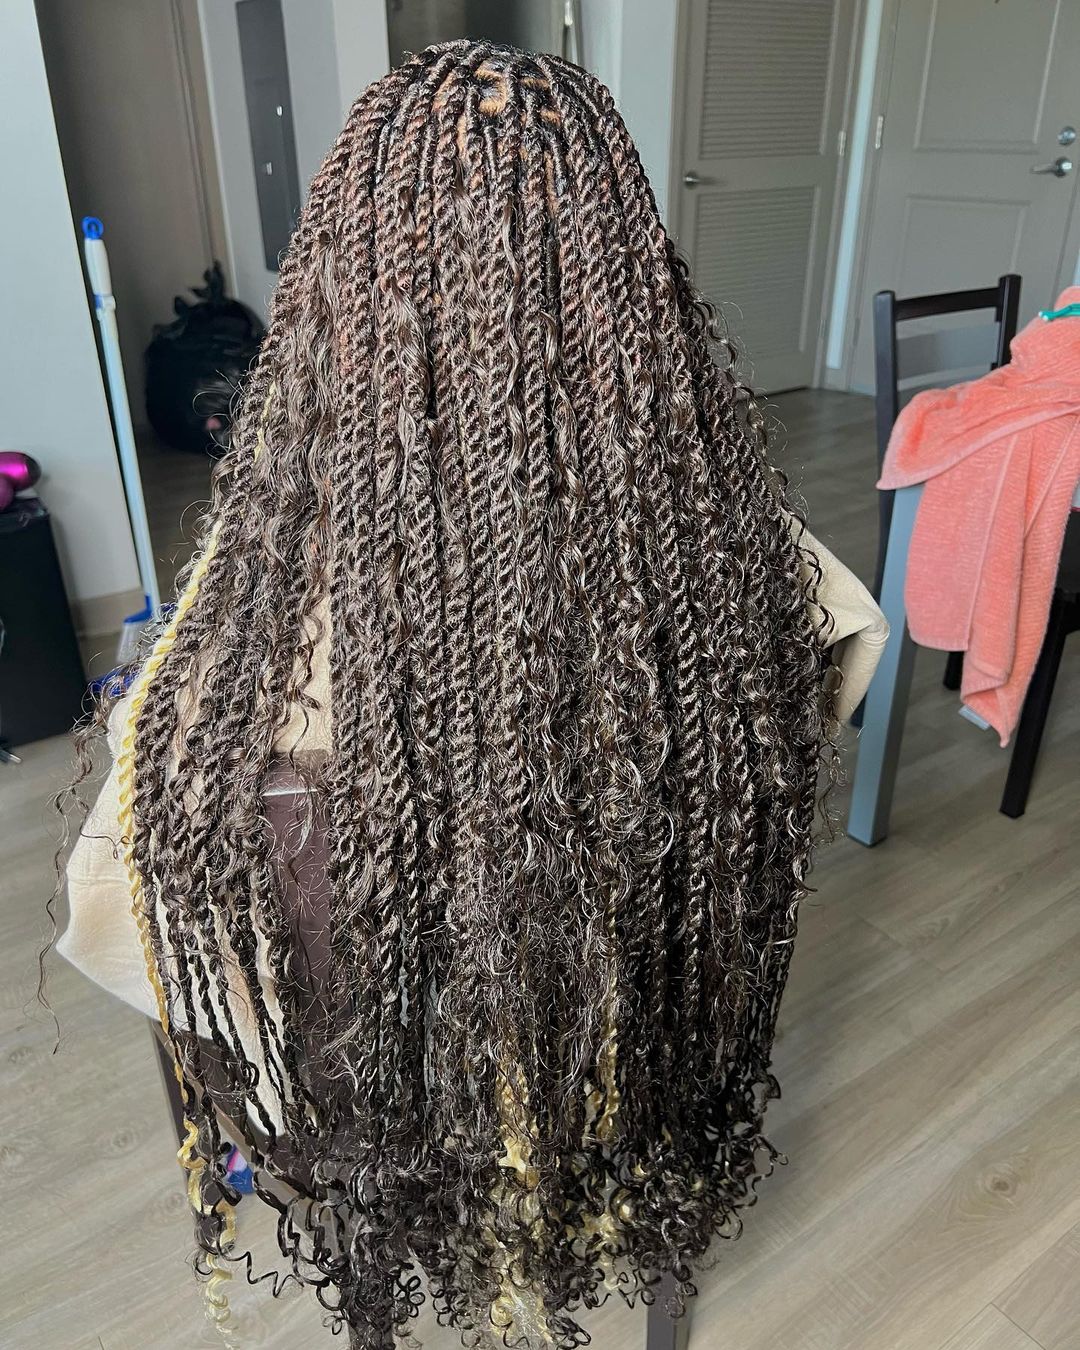 3. Full And Lengthy Bohemian Knotless Twists